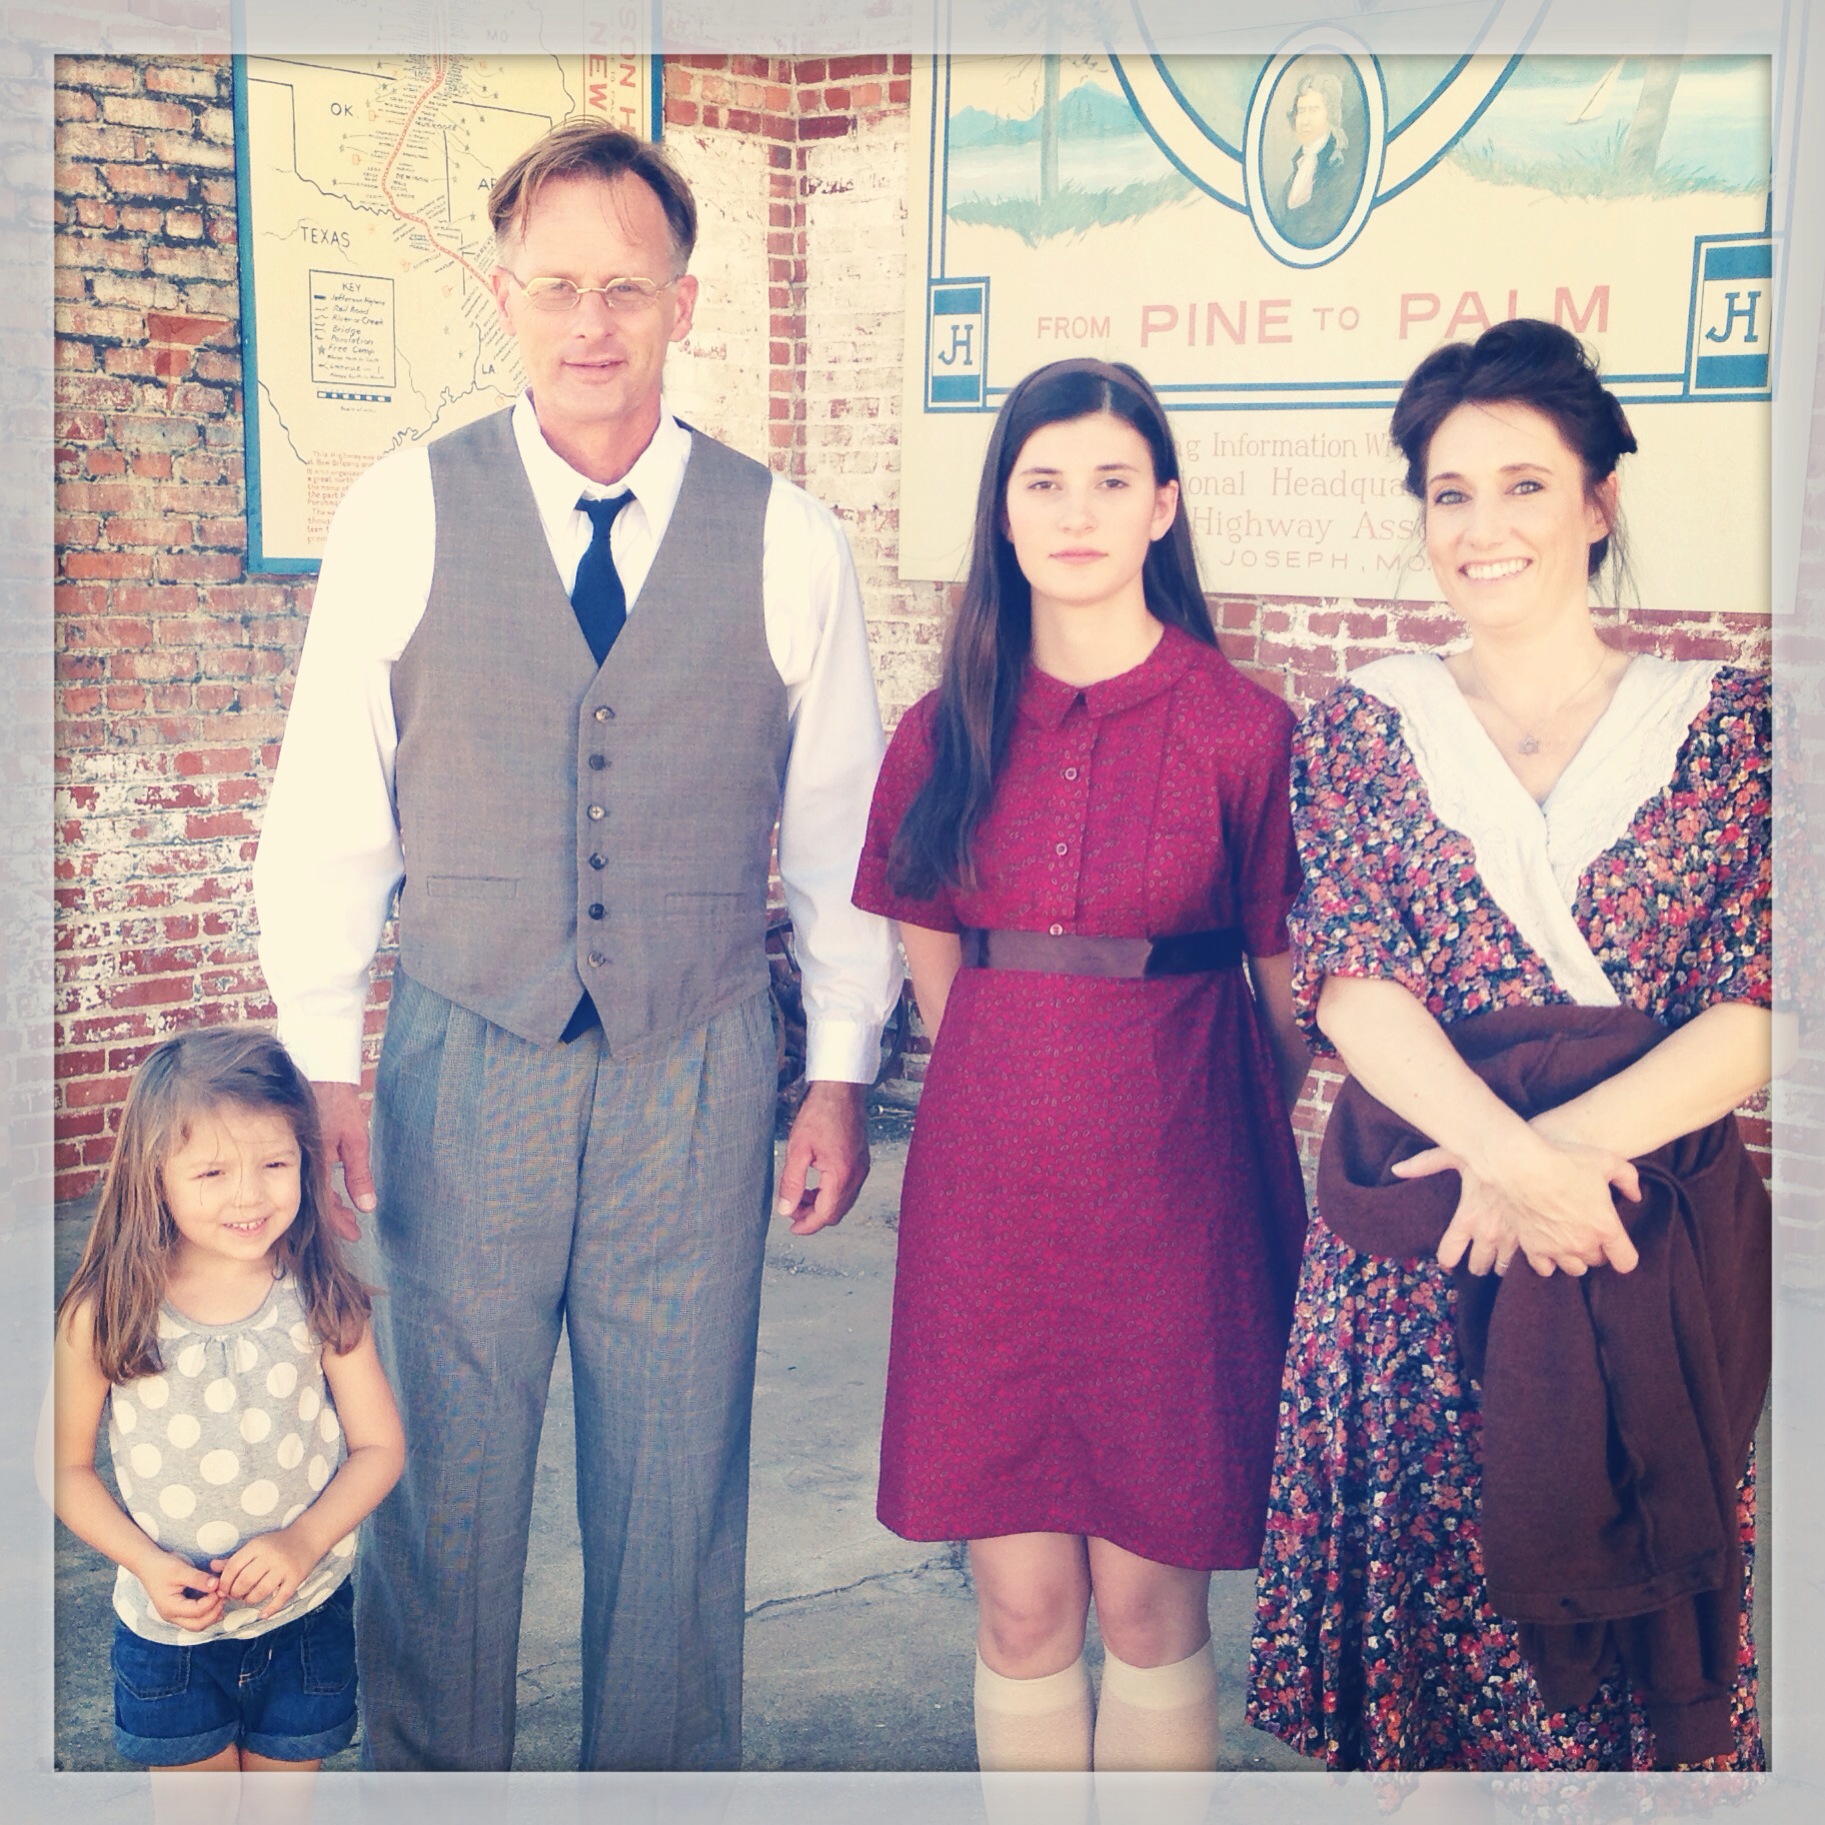 Andrea Fantauzzi on set with on screen mom Christie Courville, on screen dad Jeffrey Staab, and the little Jewish girl Amelie Vienne Lincoln while filming Adira.